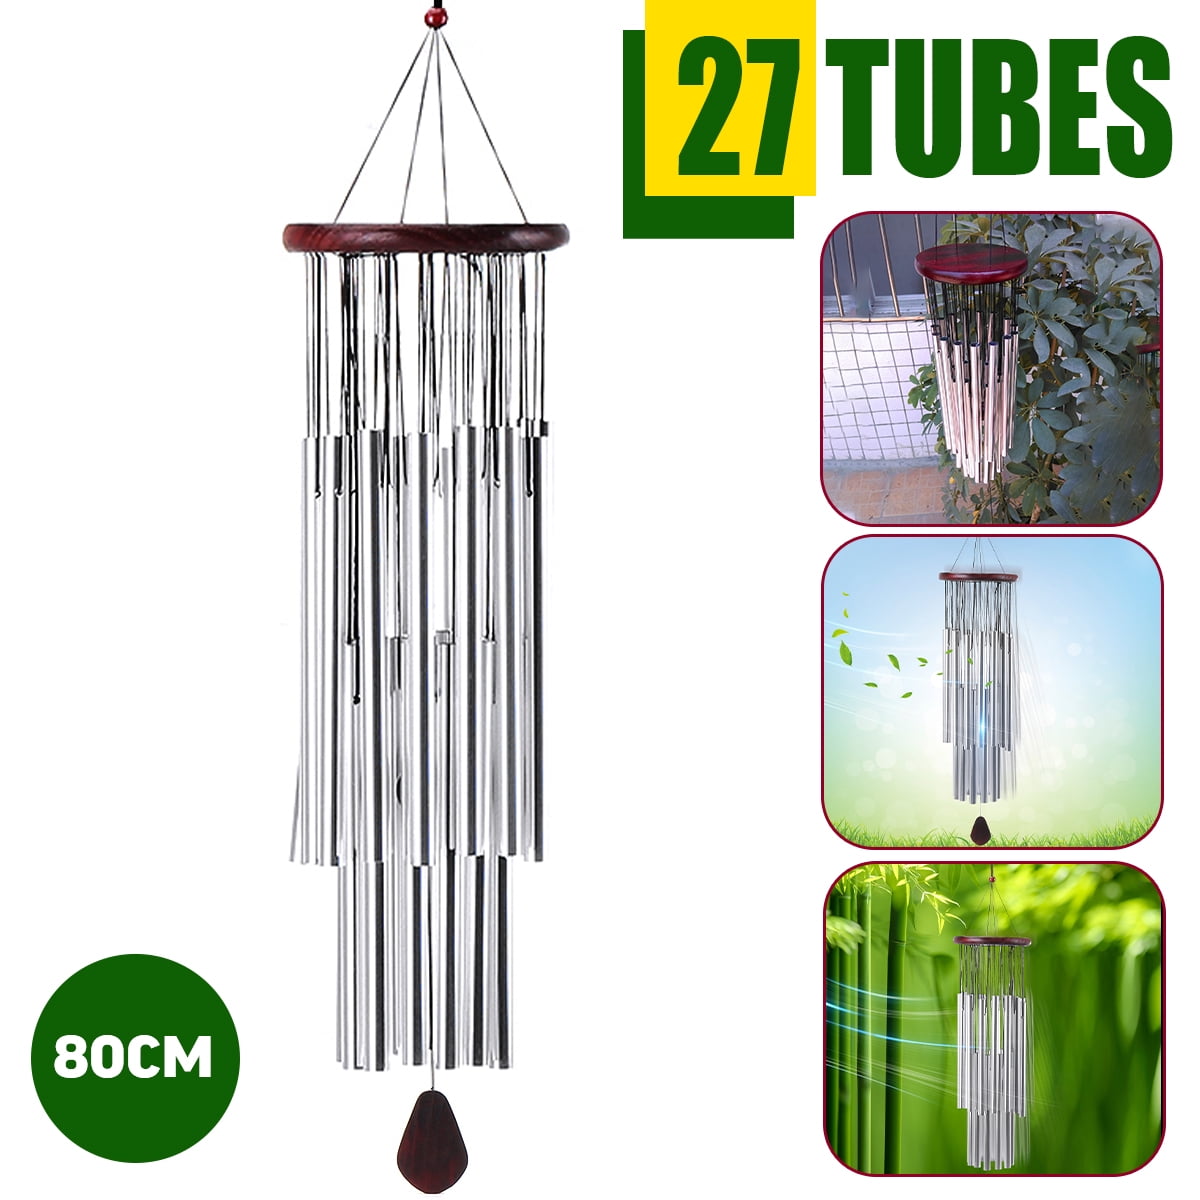 Large 27 Tubes Windchime Chapel Bells Wind Chimes Outdoor Garden Home Decor US 